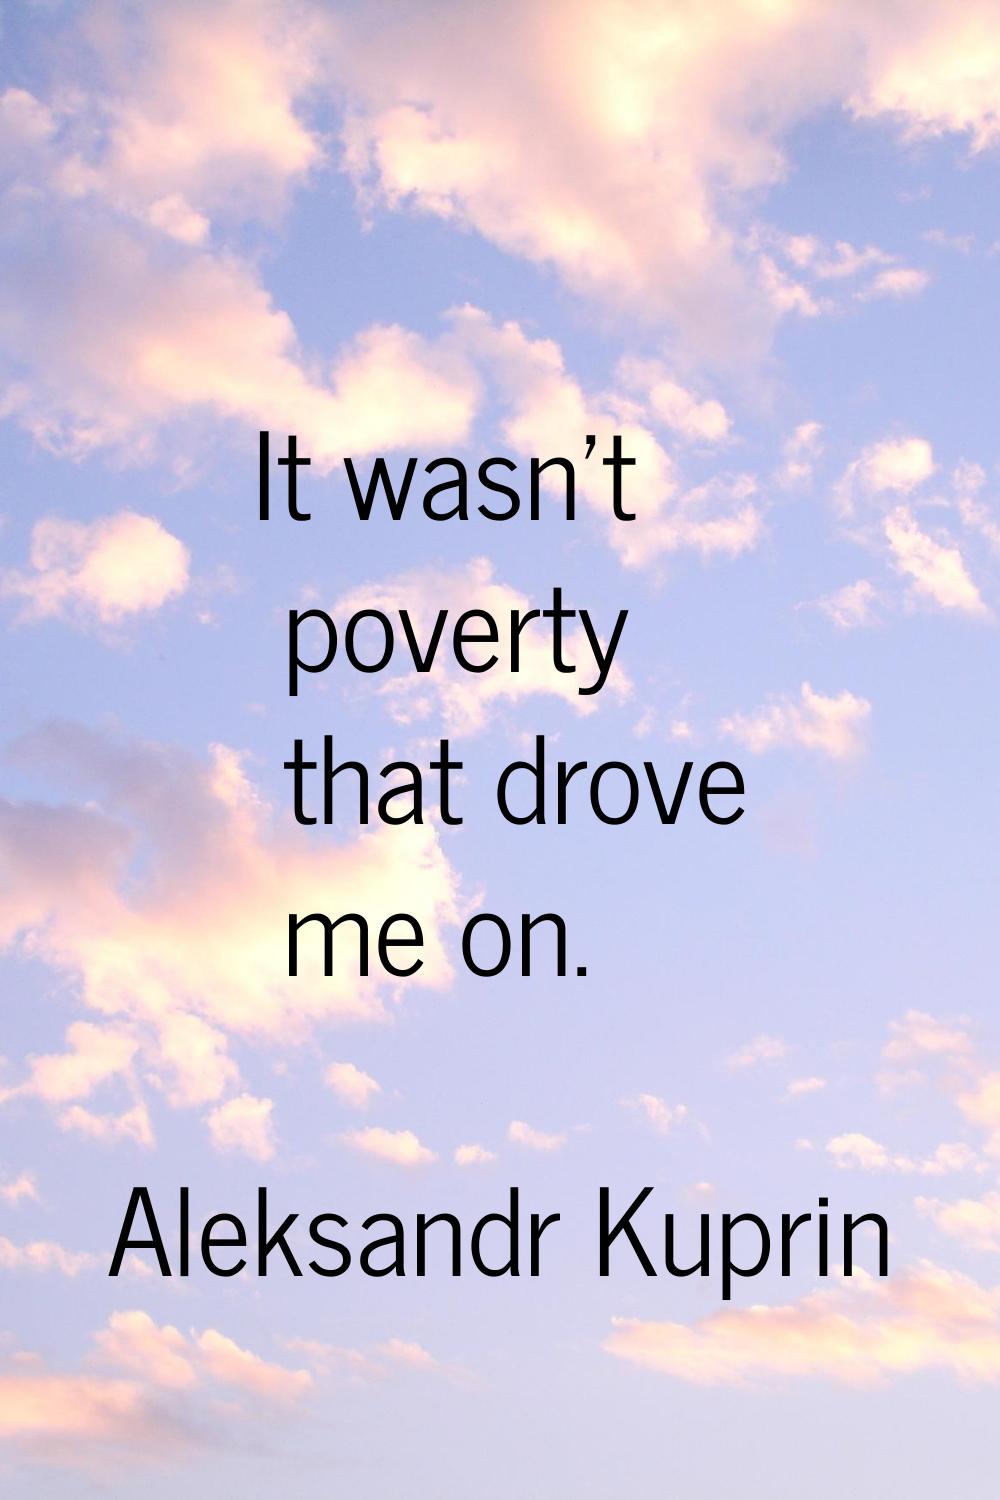 It wasn't poverty that drove me on.